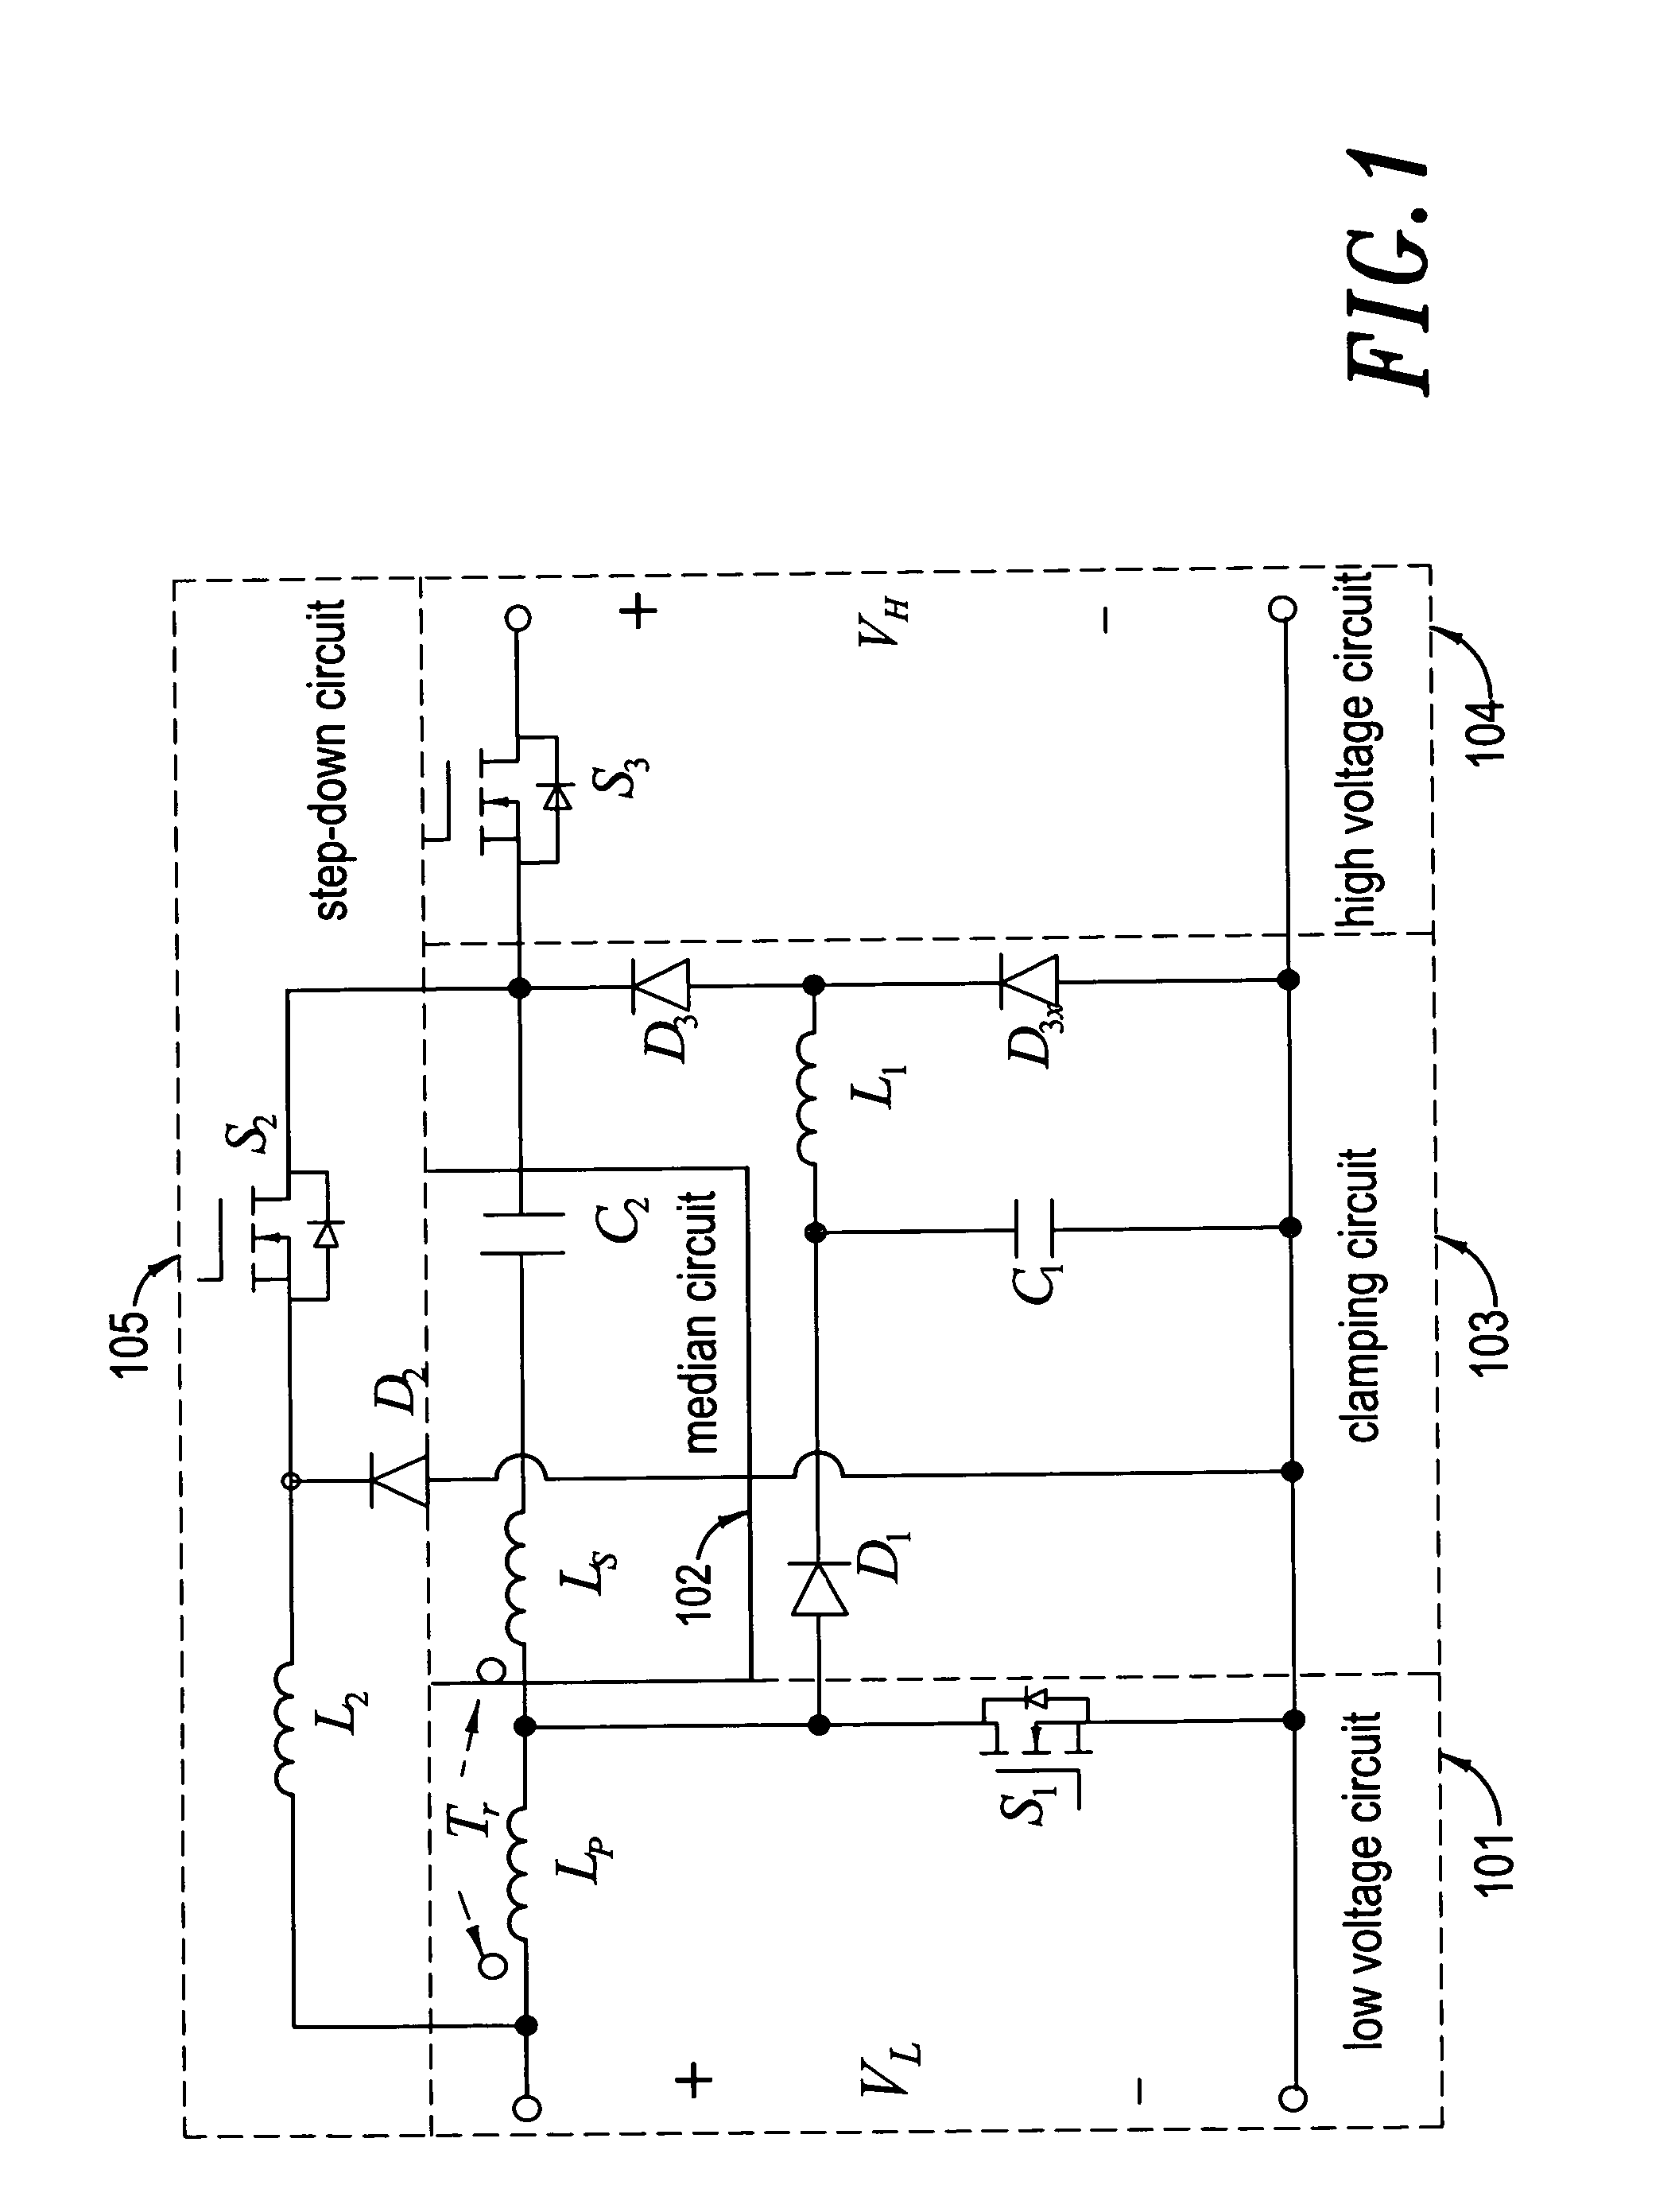 High-efficiency high-voltage difference ratio bi-directional converter